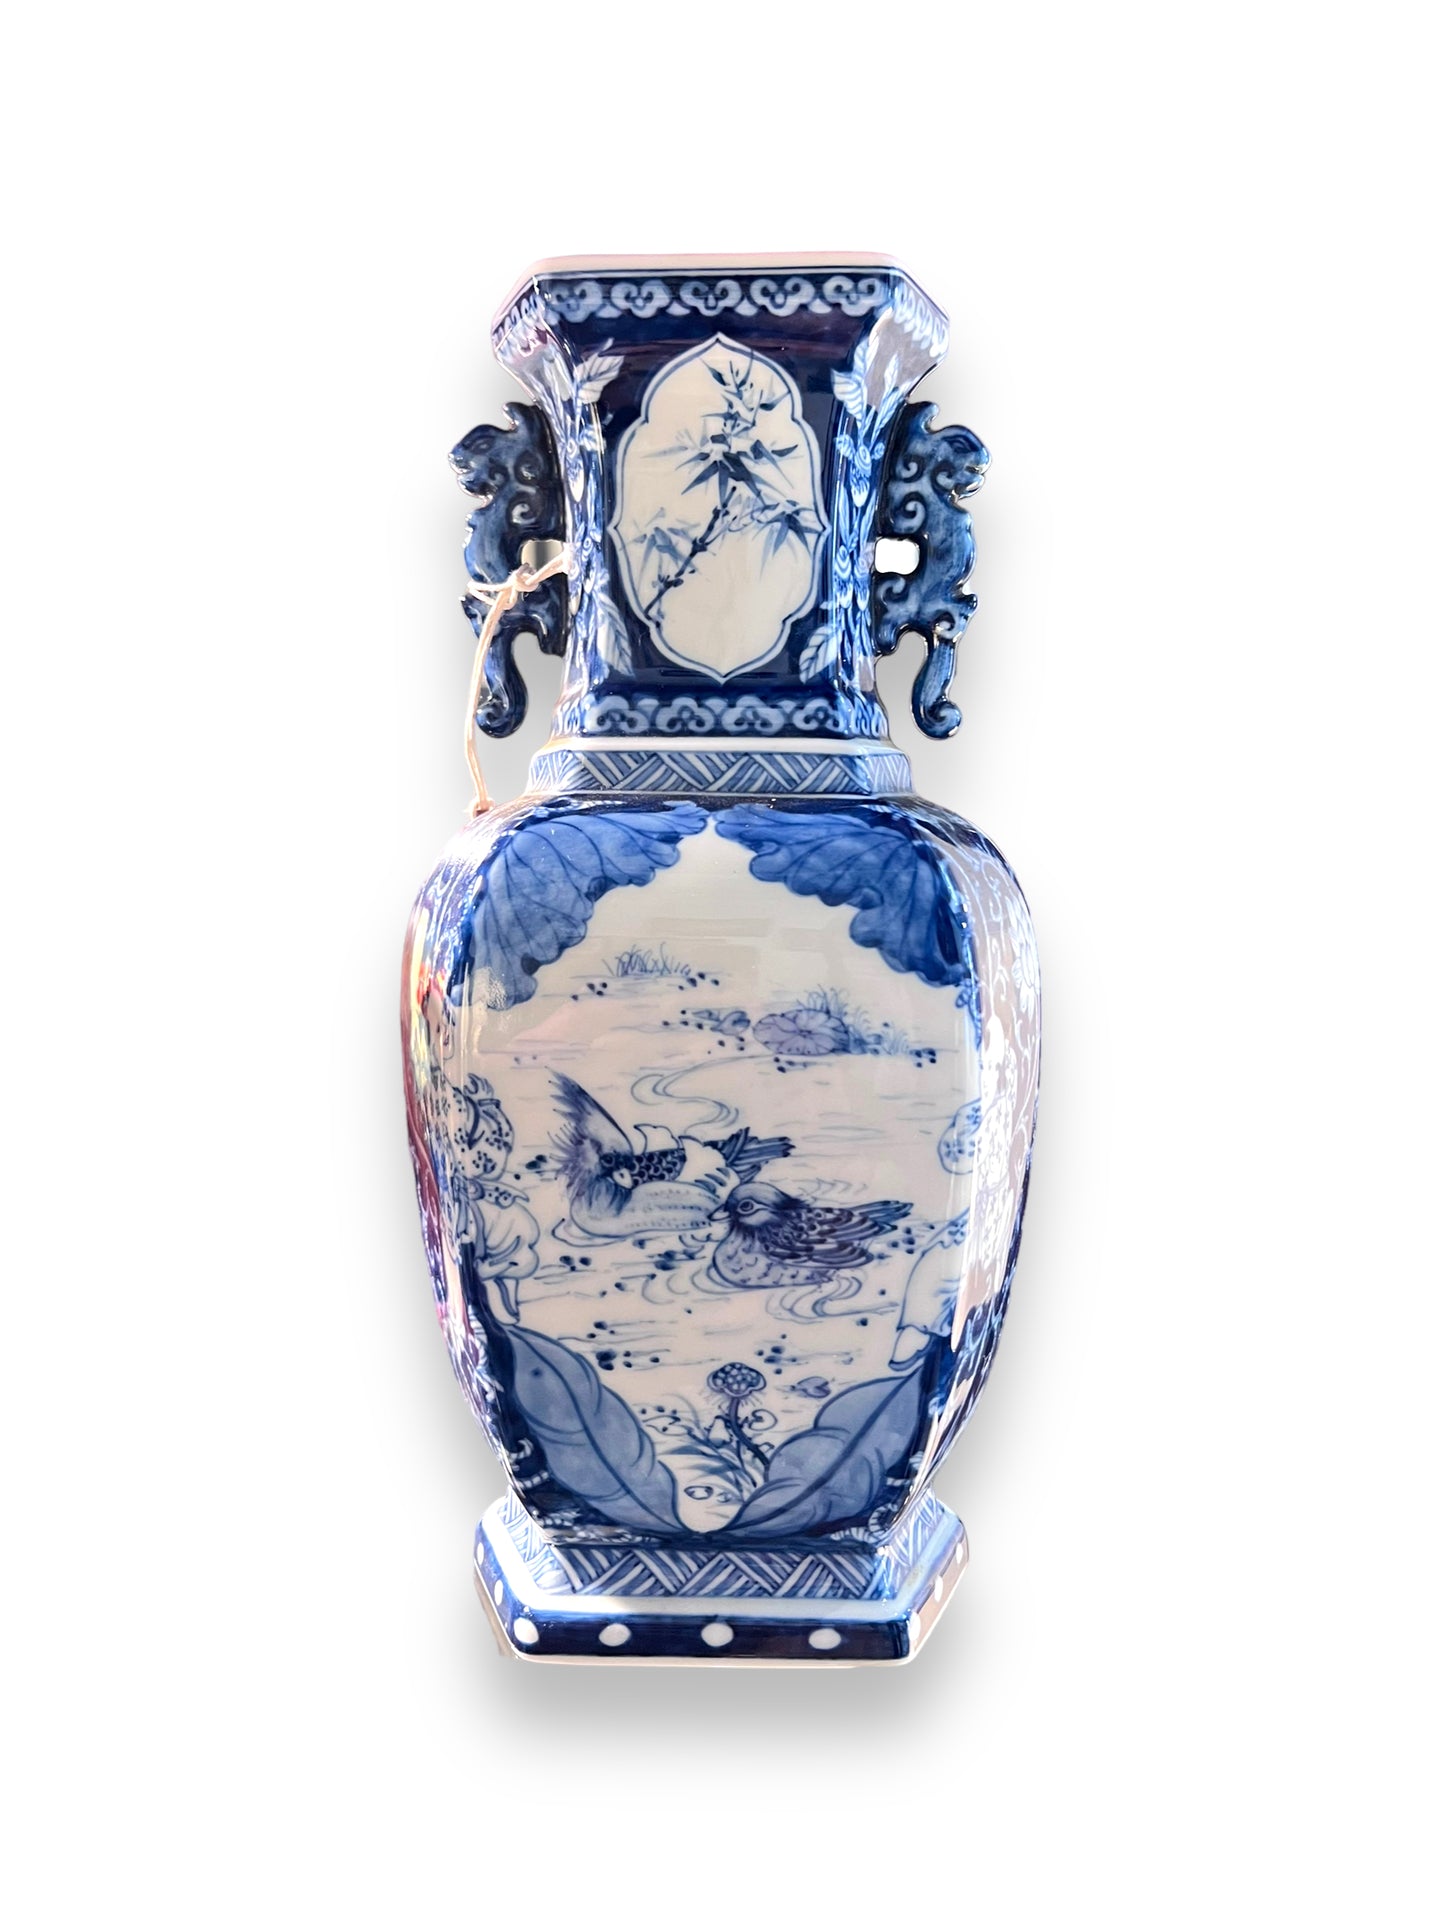 China, blue and white porcelain wall vase, 18th century - DeFrenS